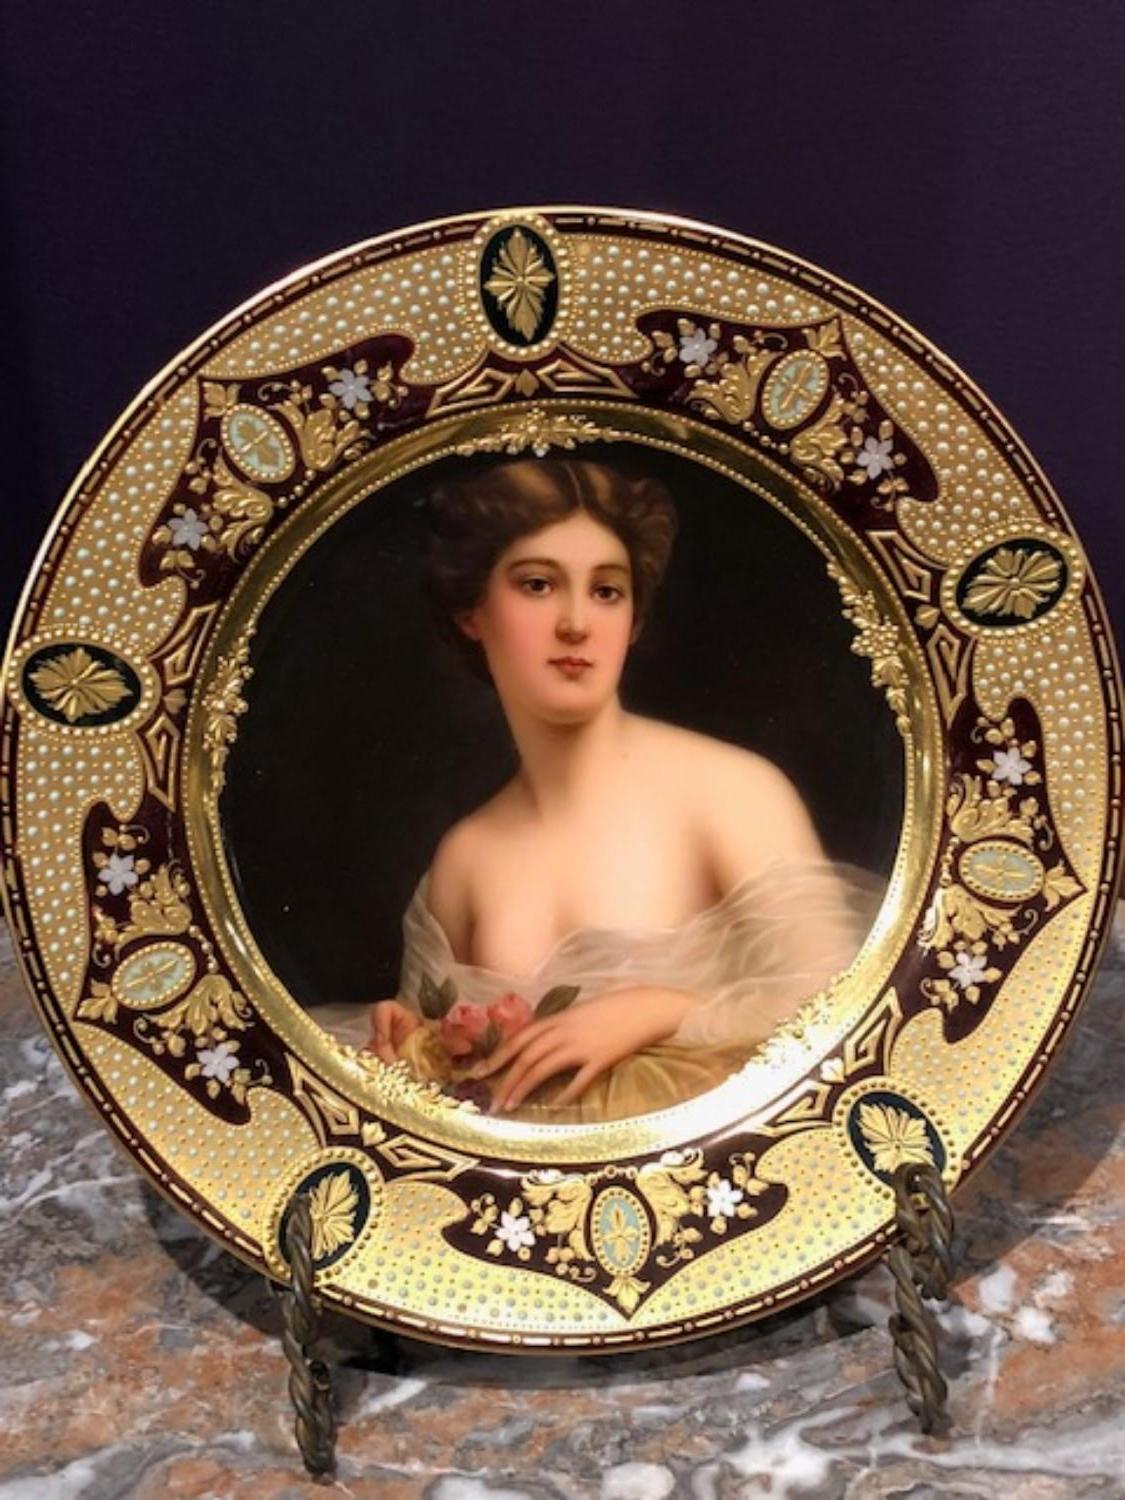 Exceptional antique hand painted jeweled Royal Vienna Porcelain plate by Wagner

Signed Wagner

Beautiful painted with portrait of a woman. Excellent quality.

Mint condition. No chips, cracks, repairs.

9.5” diameter.